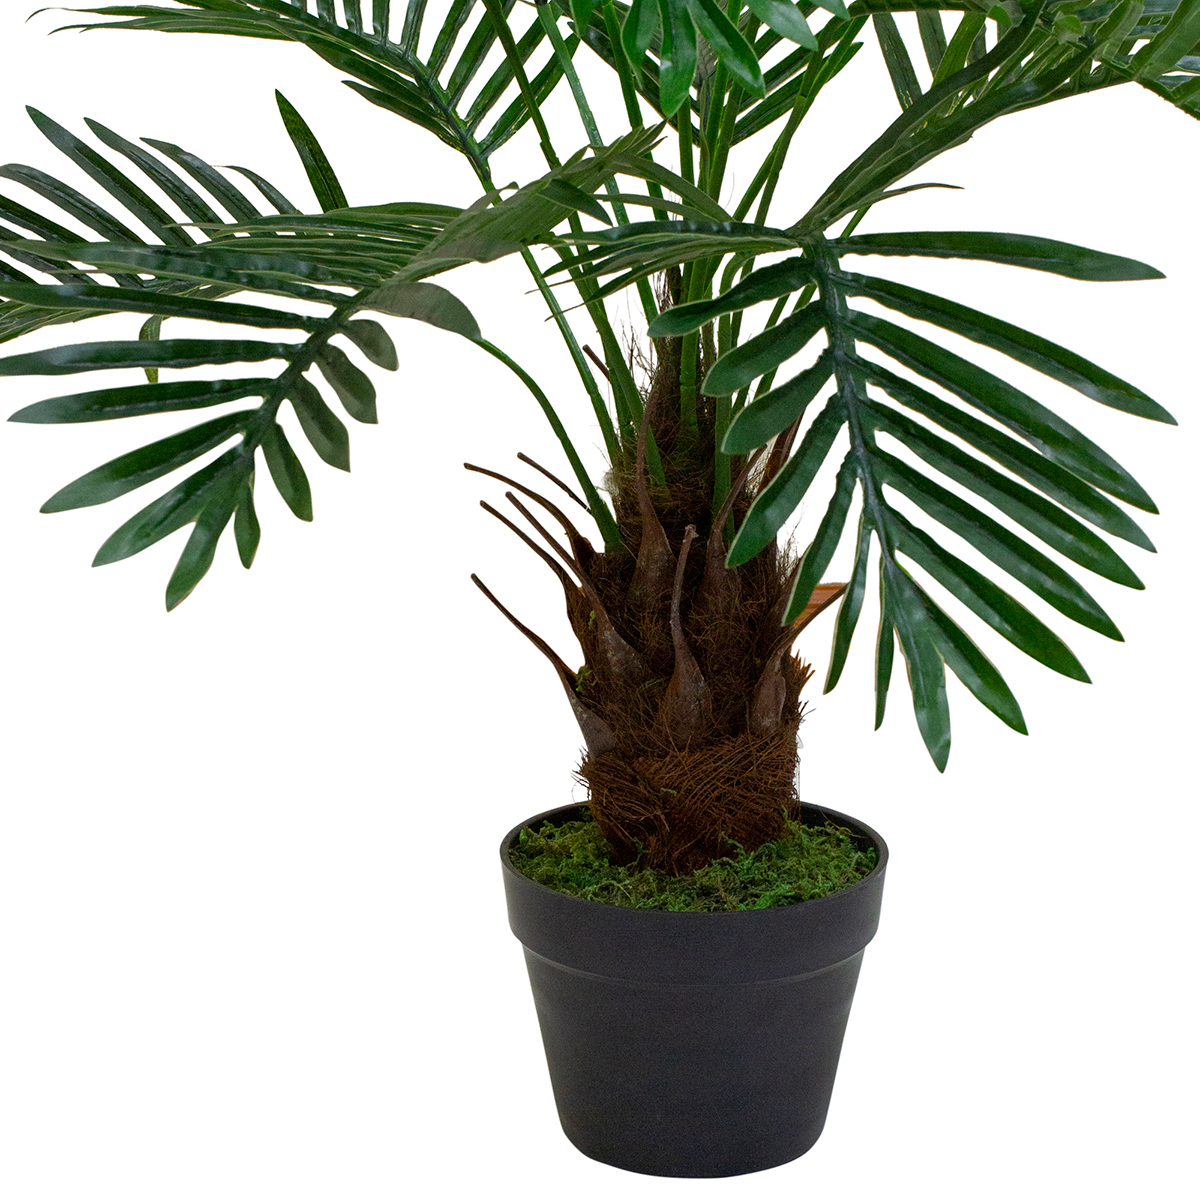 Northlight Seasonal 35in. Artificial Miniature Potted Palm Plant